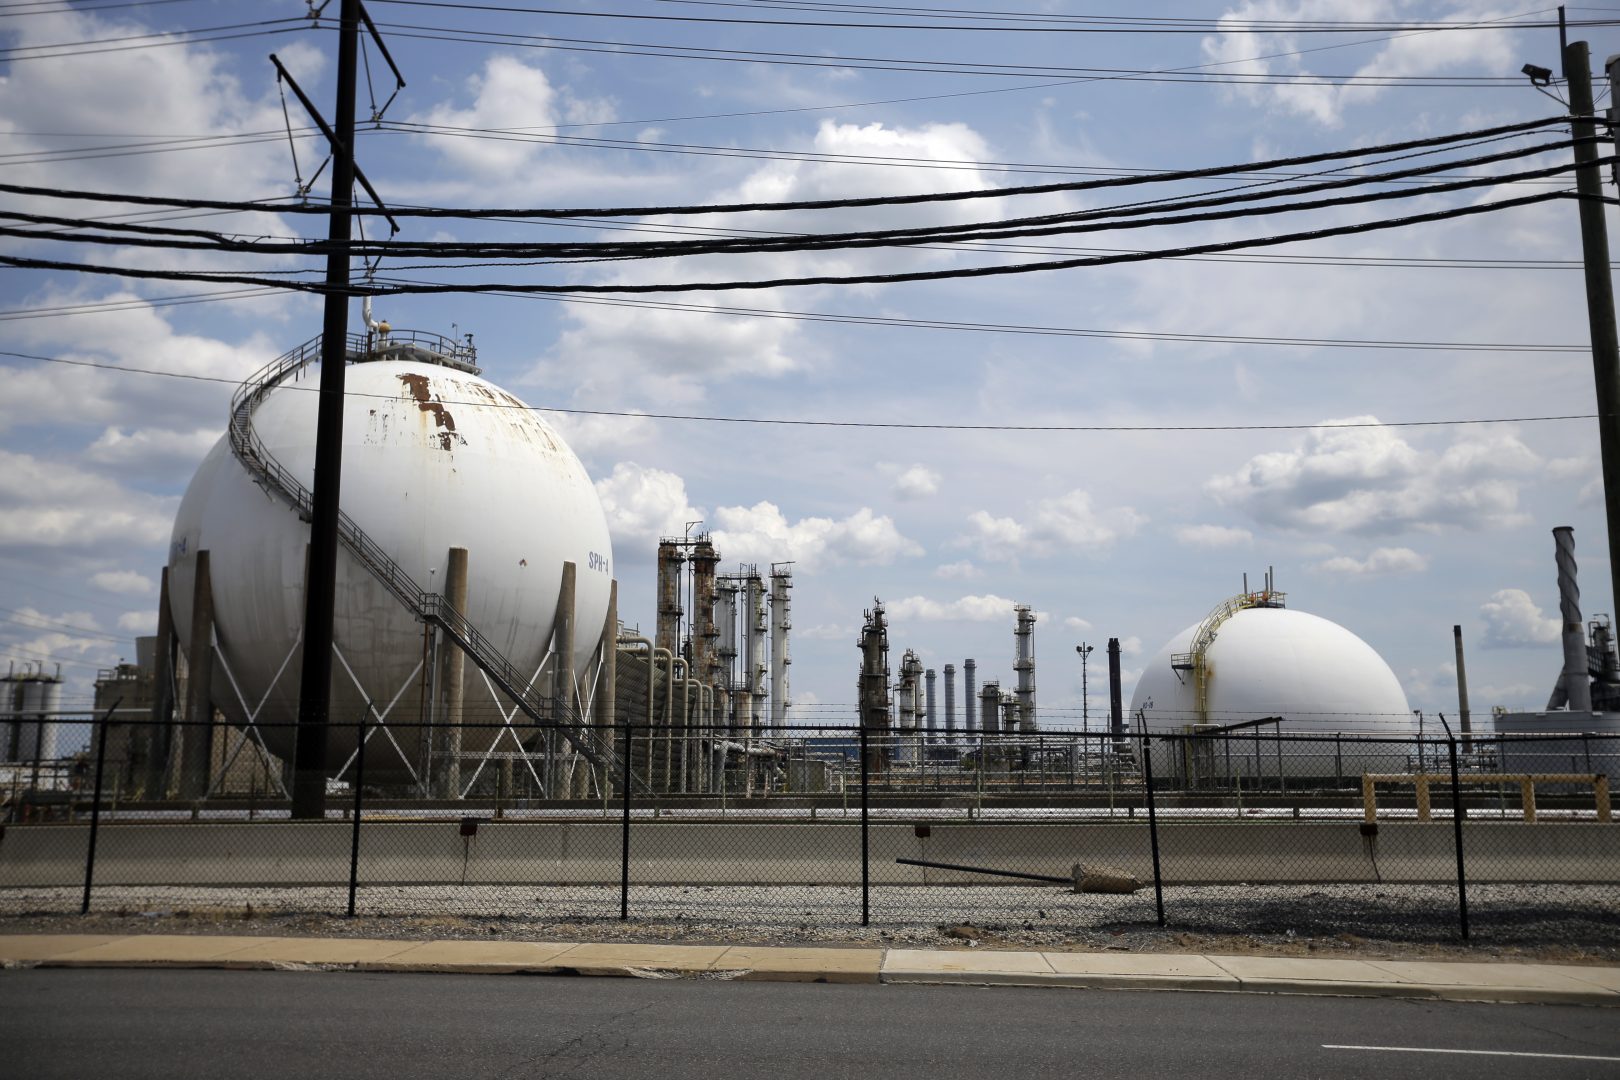 This photo taken on July 11, 2012, shows the Marcus Hook Refinery in Marcus Hook, Pa. The facility, which is owned and operated by Sunoco Logistics, is an international hub for natural gas liquidspropane, ethane, and butanefrom the Marcellus Shale region of Western Pennsylvania. Sunoco Logistics is spending roughly $2.5 billion on the Mariner East projects, which will connect the western part of the state to the port at Marcus Hook.  